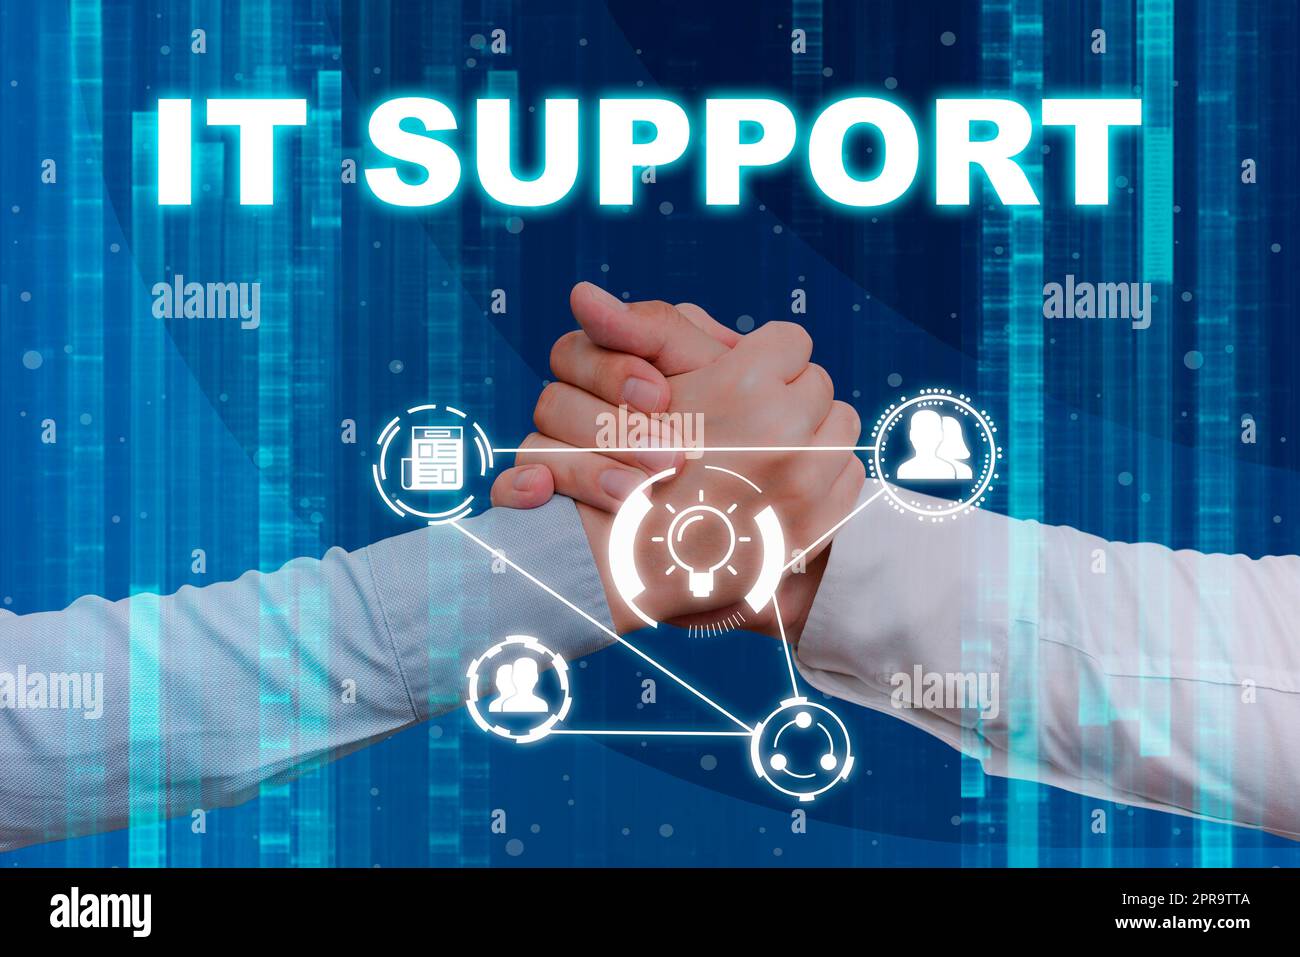 Sign displaying It Support. Business idea Lending help about information technologies and relative issues Hands shaking presenting innovative plan ideas symbolizing teamwork. Stock Photo